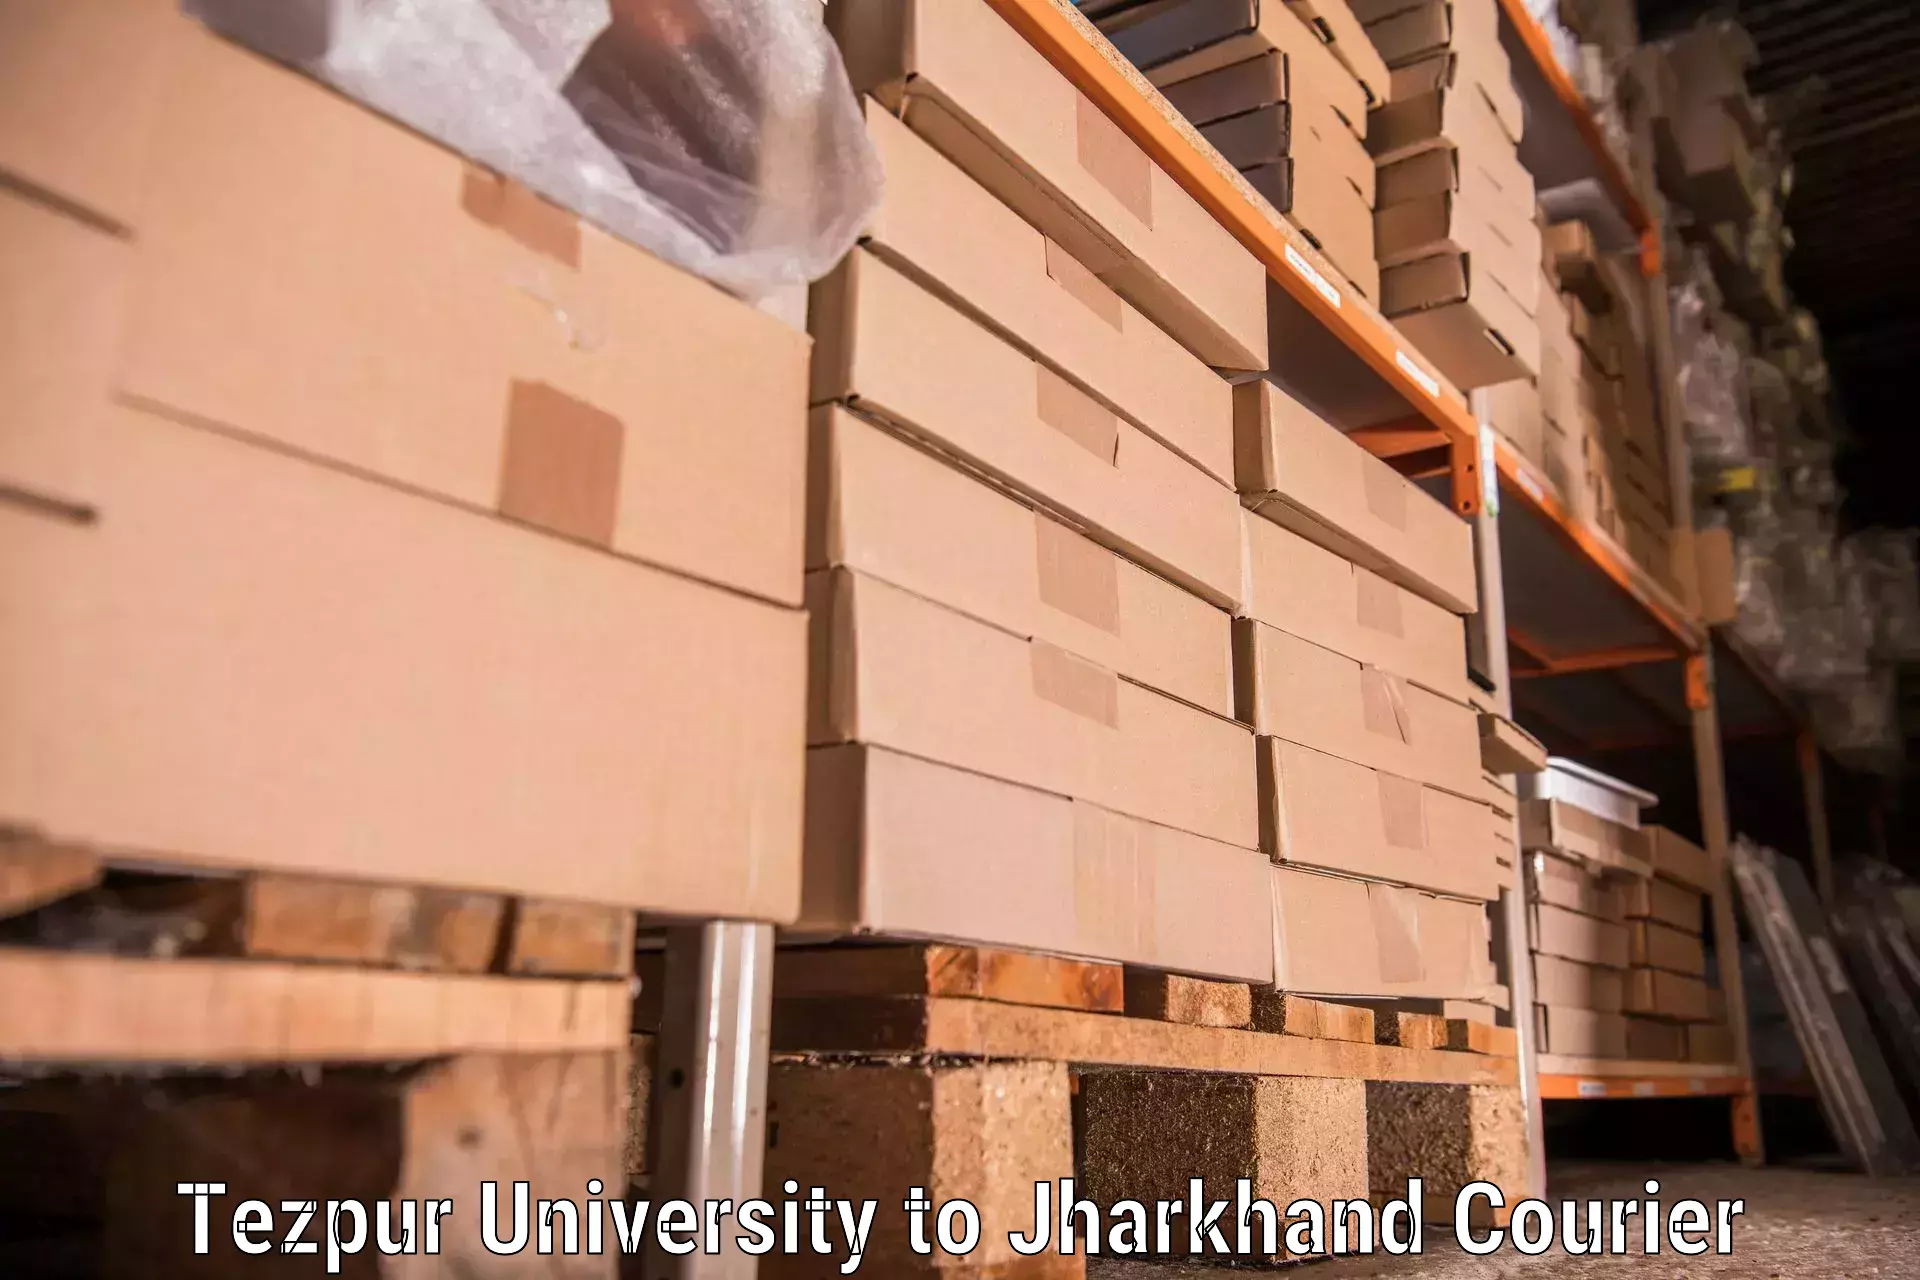 Expert moving and storage Tezpur University to Jharkhand